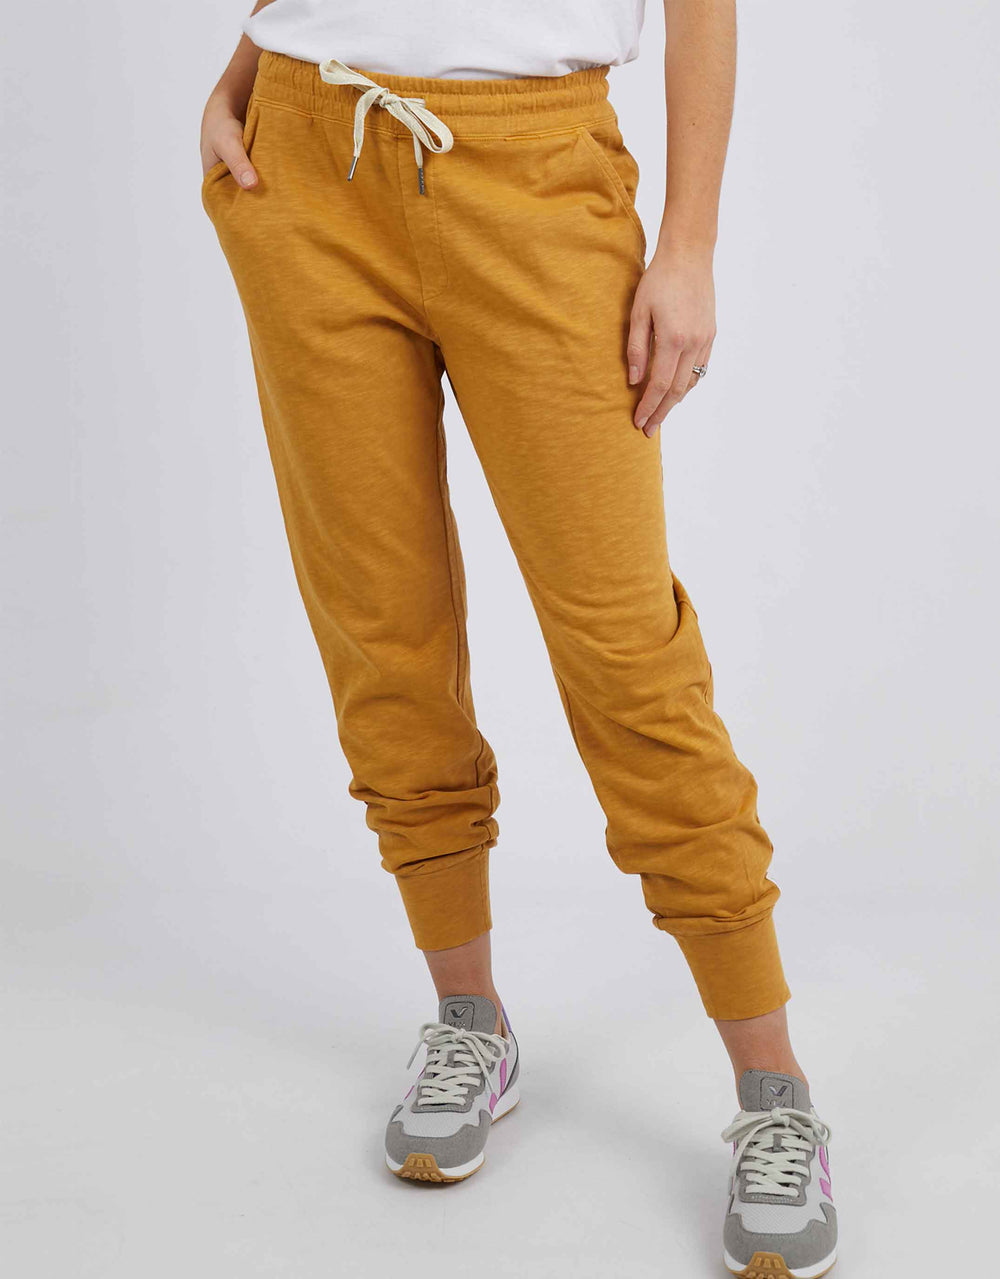 Out & About Pant - Honey Mustard